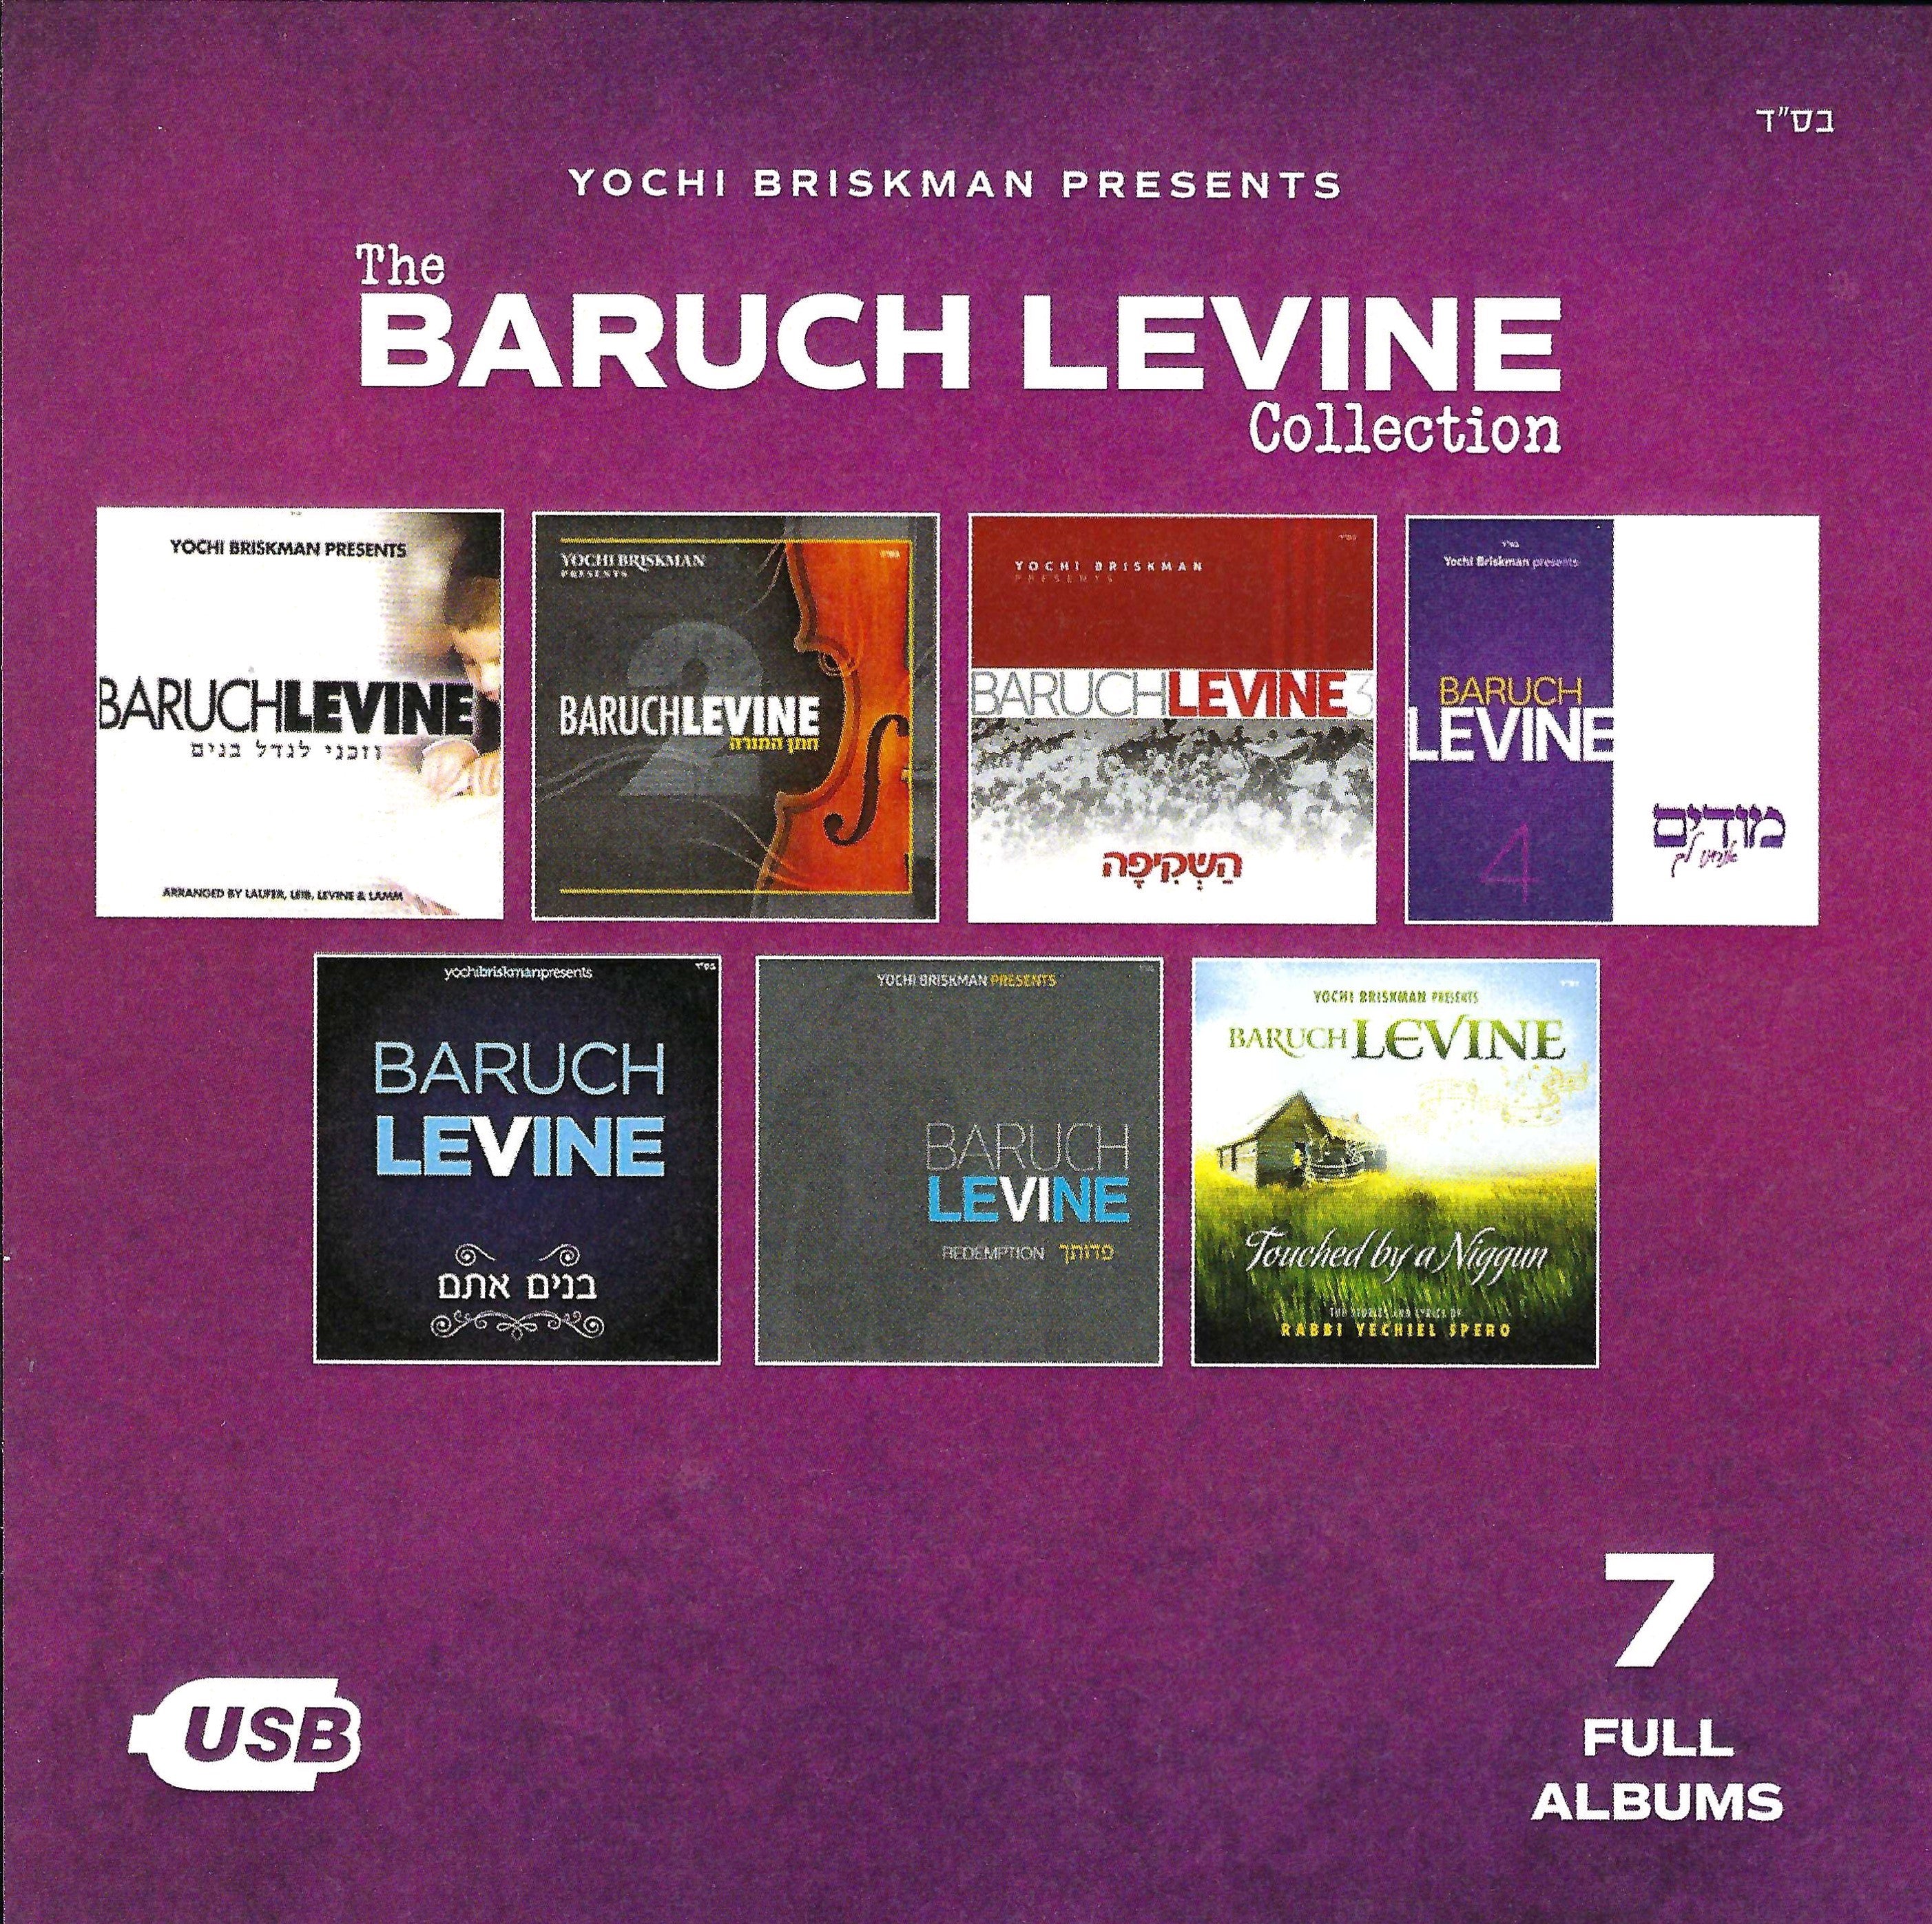 Project Productions - The Baruch Levine Collection USB